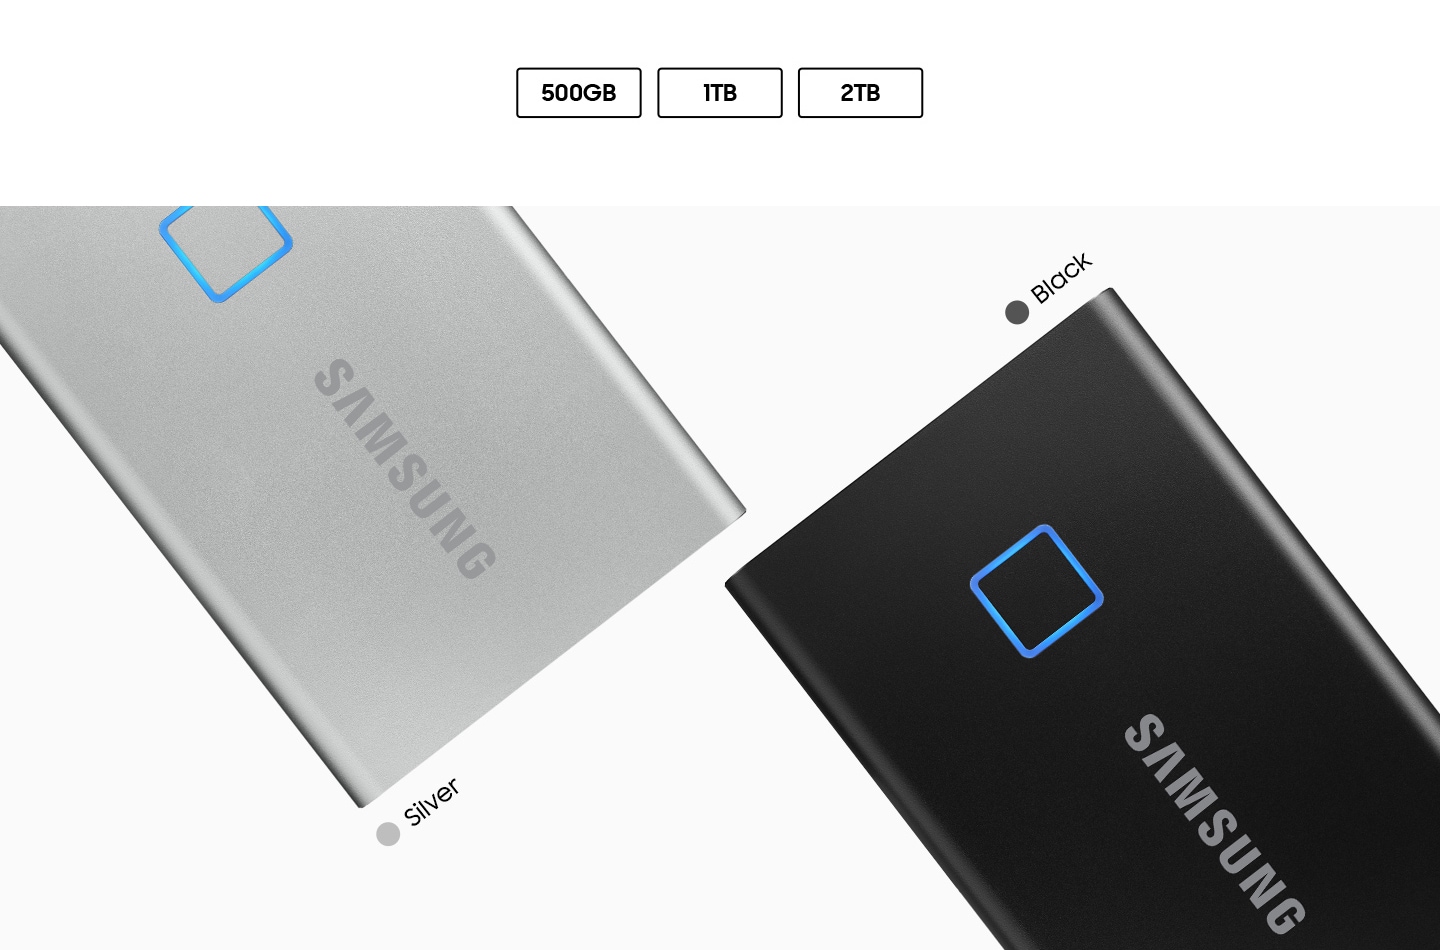 https://image.semiconductor.samsung.com/image/samsung/p6/semiconductor/consumer-storage/portable-ssd/t7-touch/web_04_t7-black_silver_design_01.png?$ORIGIN_PNG$